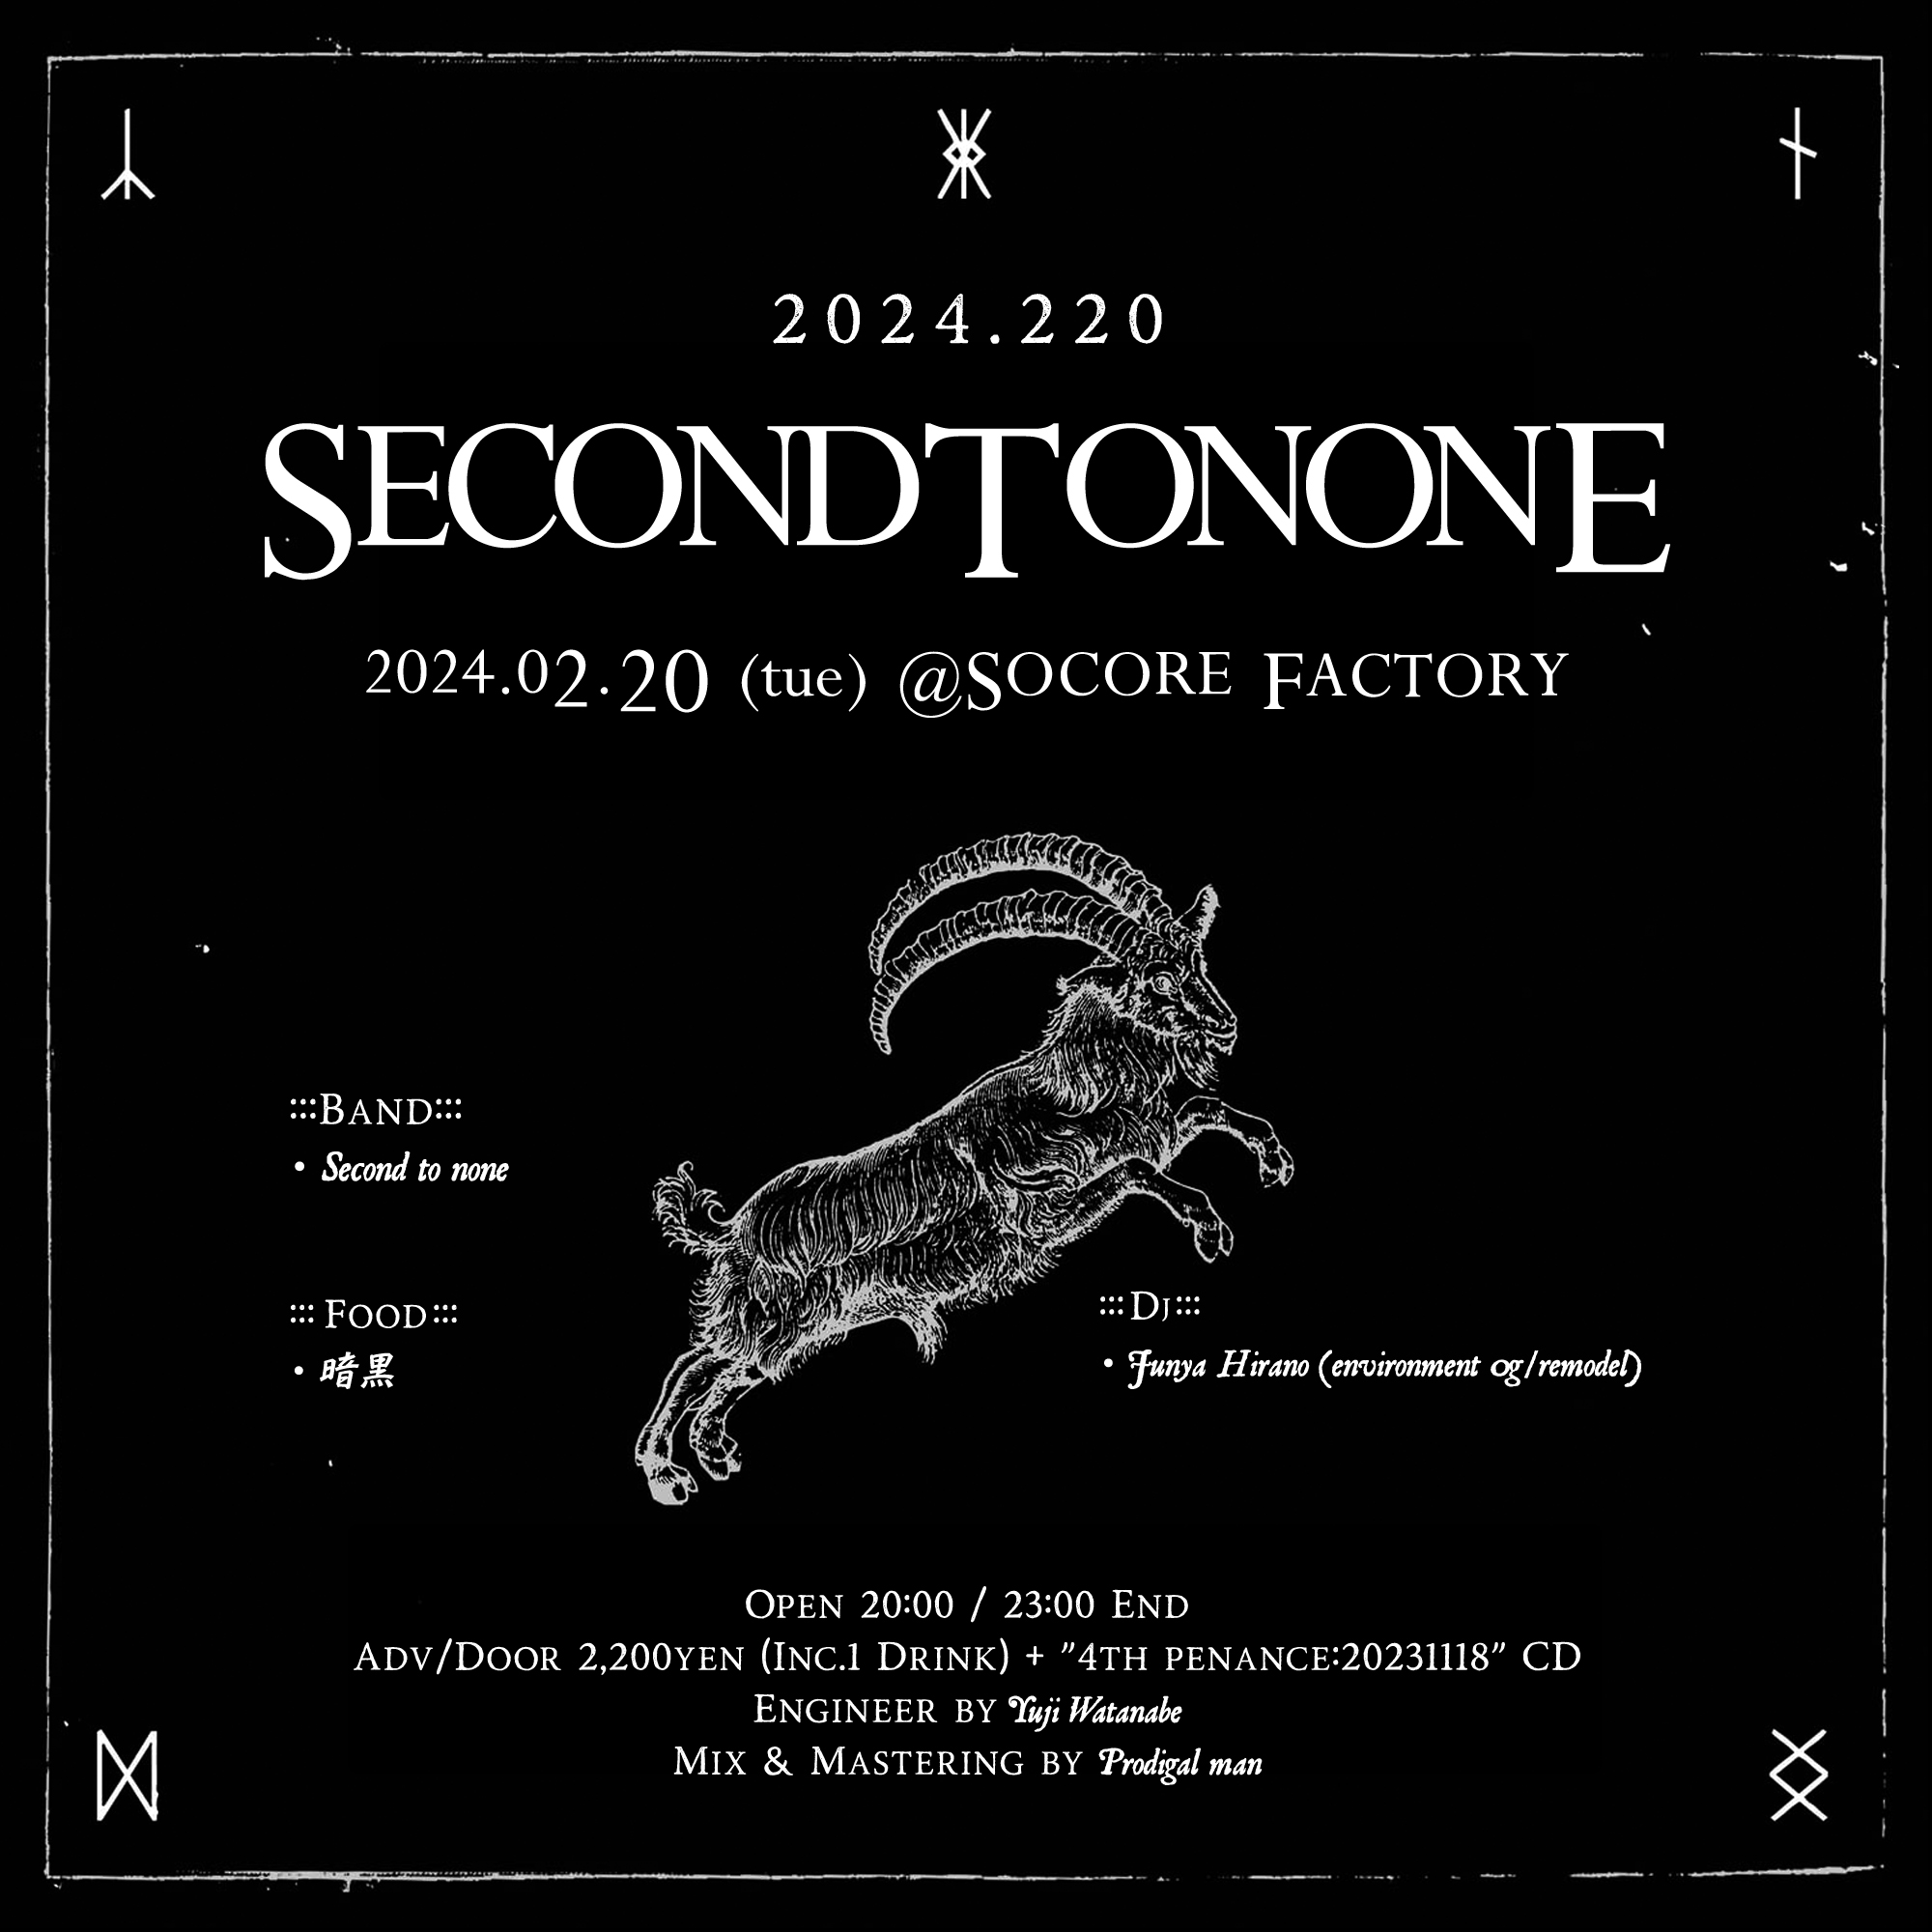 SECOND TO NONE ライブのお知らせ